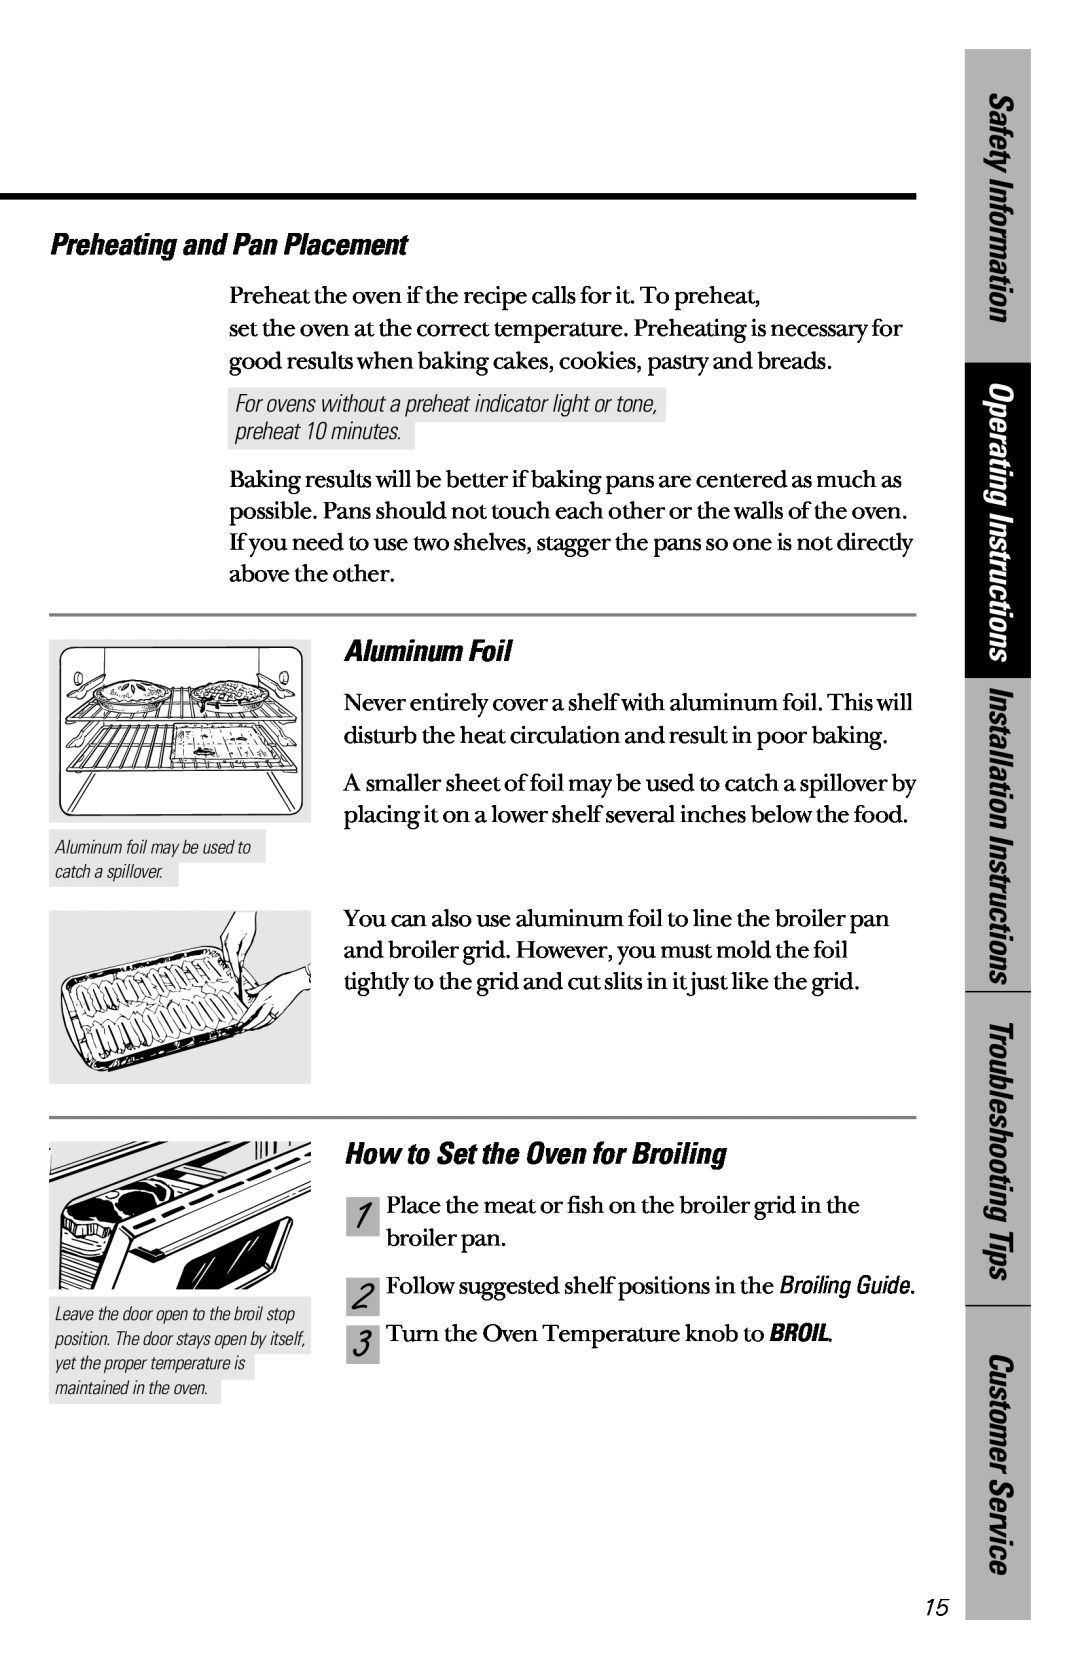 Hotpoint RB533, RB526 Tips Customer Service, Preheating and Pan Placement, Aluminum Foil, How to Set the Oven for Broiling 